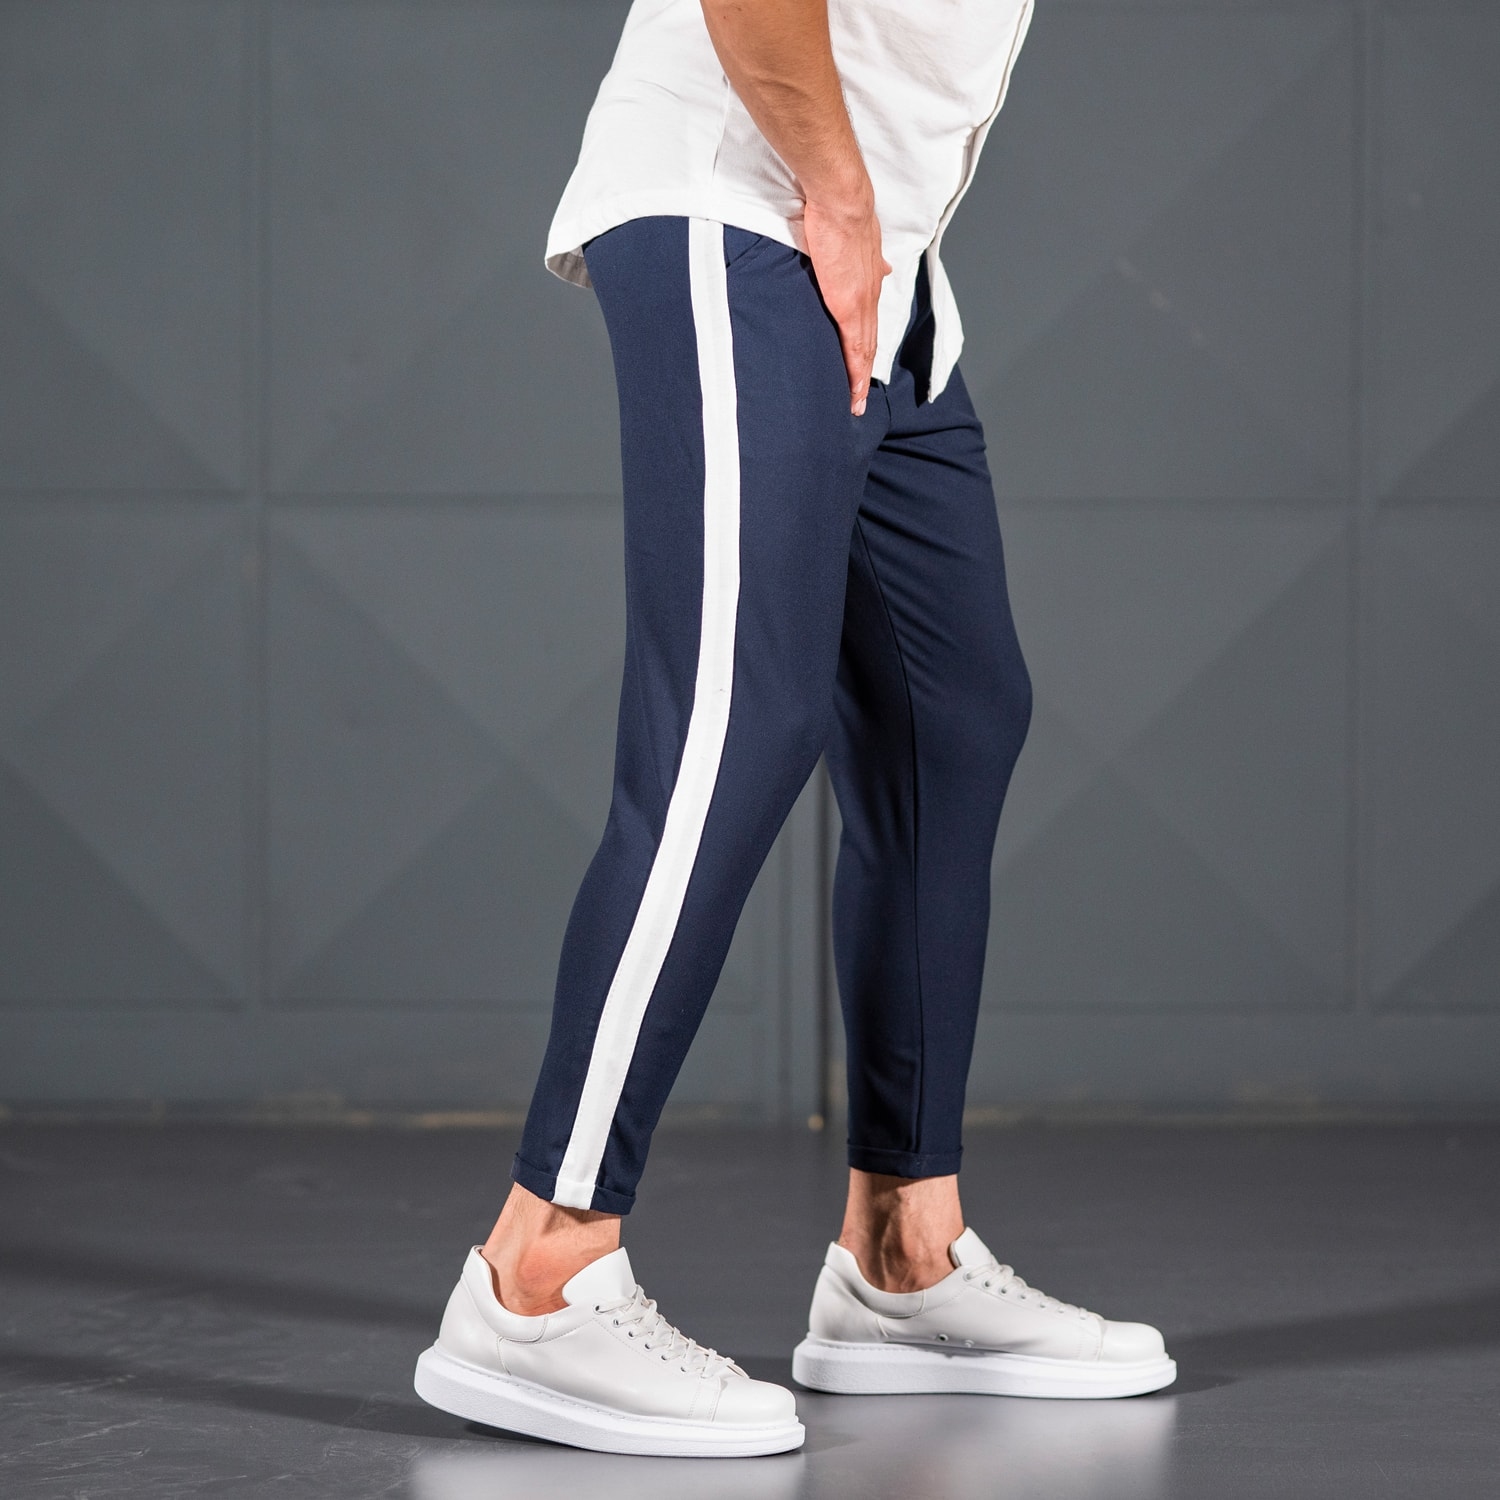 Men's Navy Blue Trousers with White Stripes